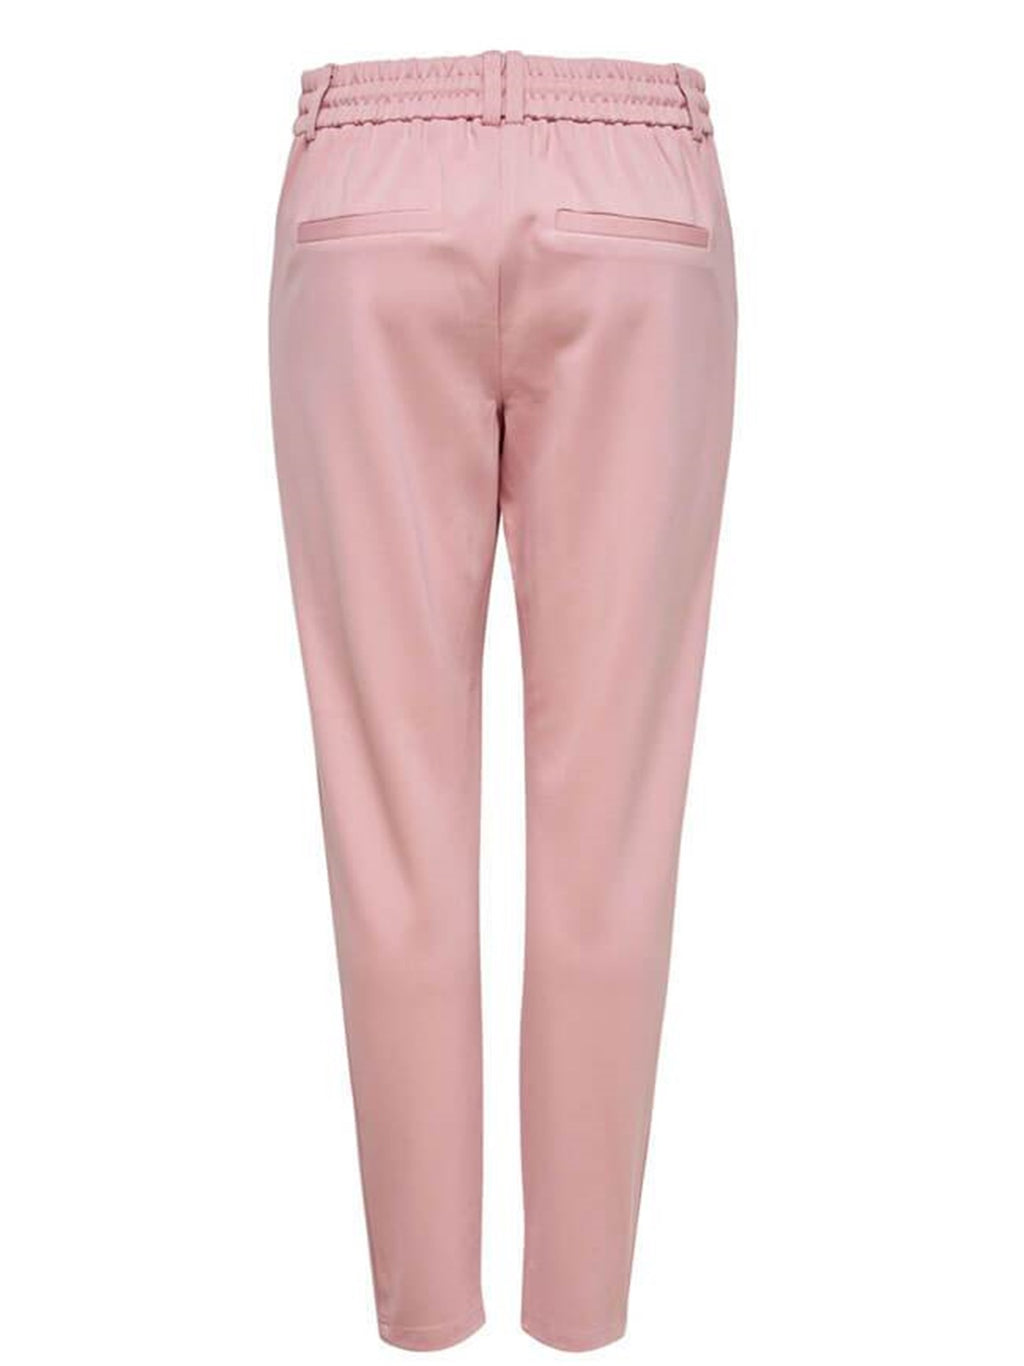 Poptrash Trousers - Pink